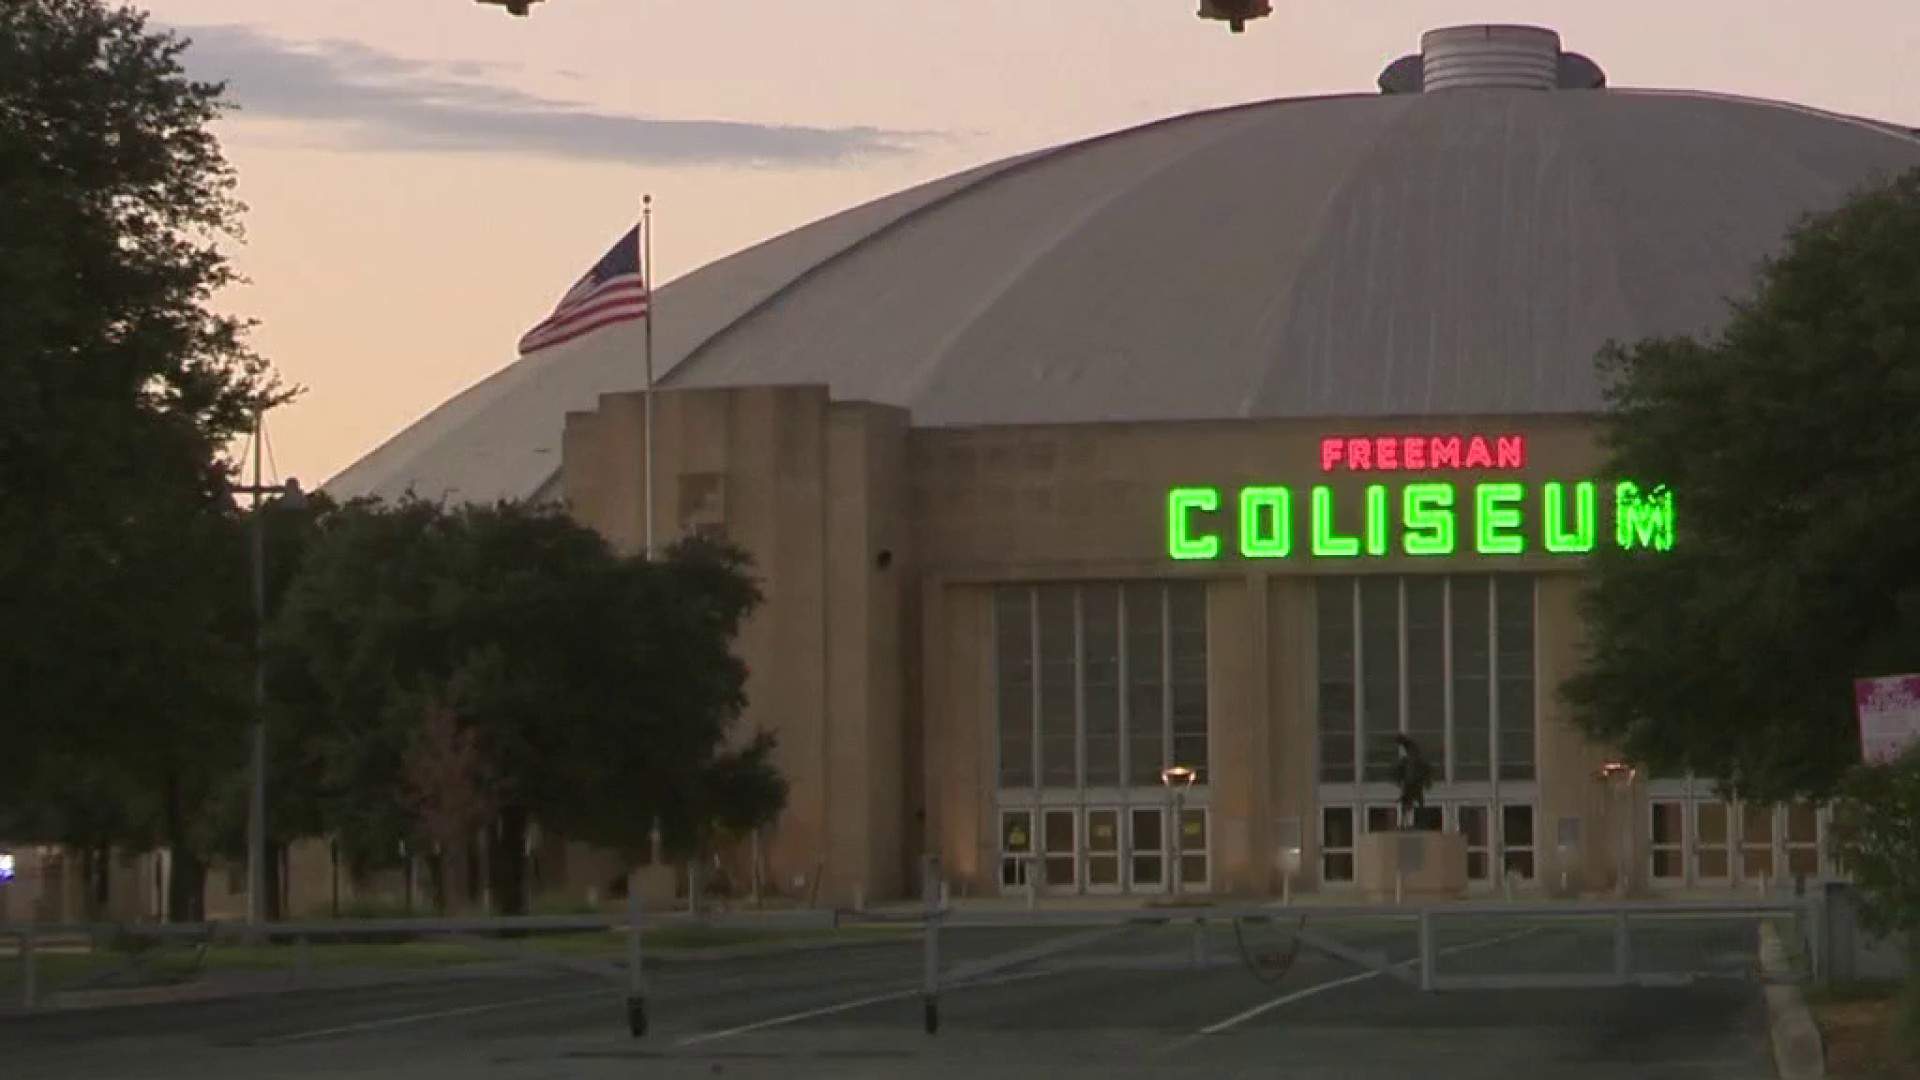 Freeman Coliseum may house migrant children if agreement is reached with federal government, Bexar County judge says